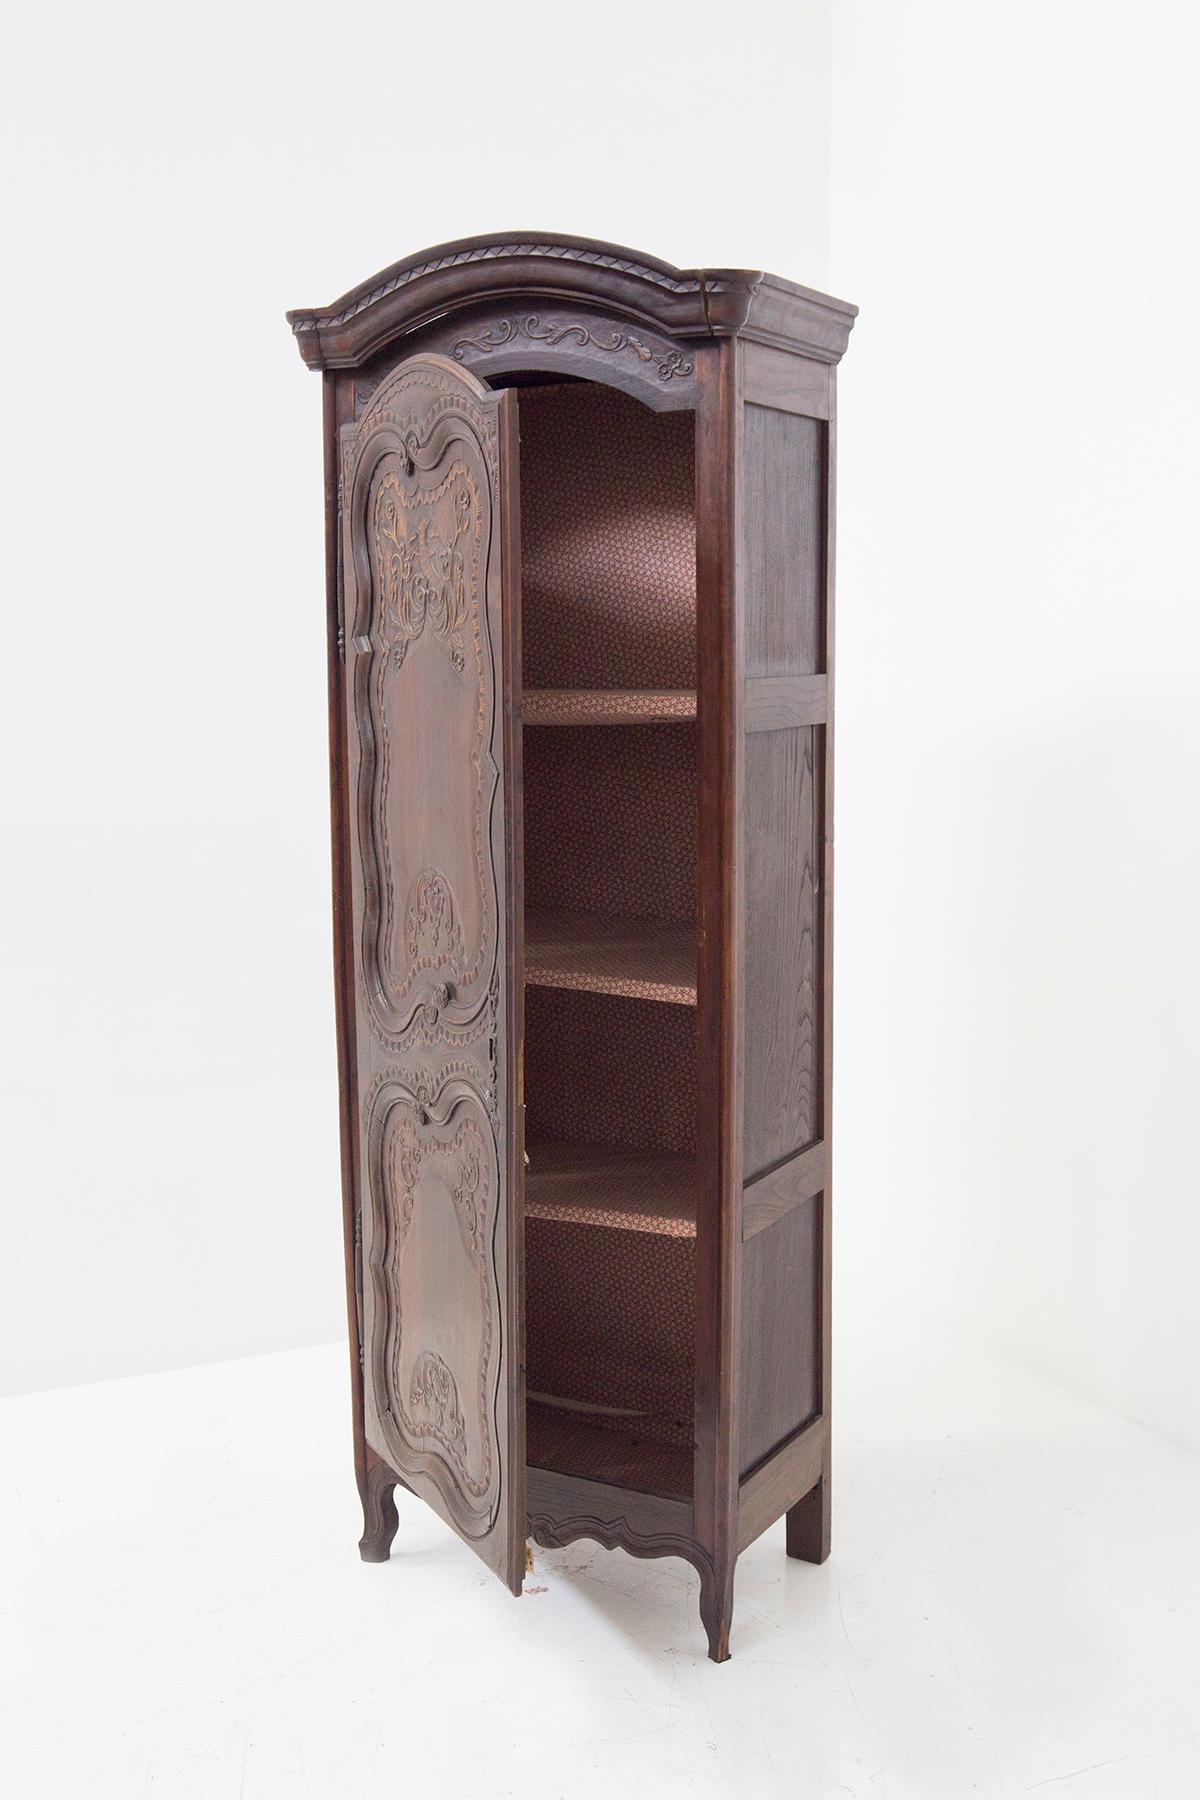 Rare 18th-century wooden cabinet in the style of Louis XV, fine French manufacture.
The cabinet is made entirely of fine dark wood, four legs for support. The two legs at the front are more worked and thin, very important, those at the back have